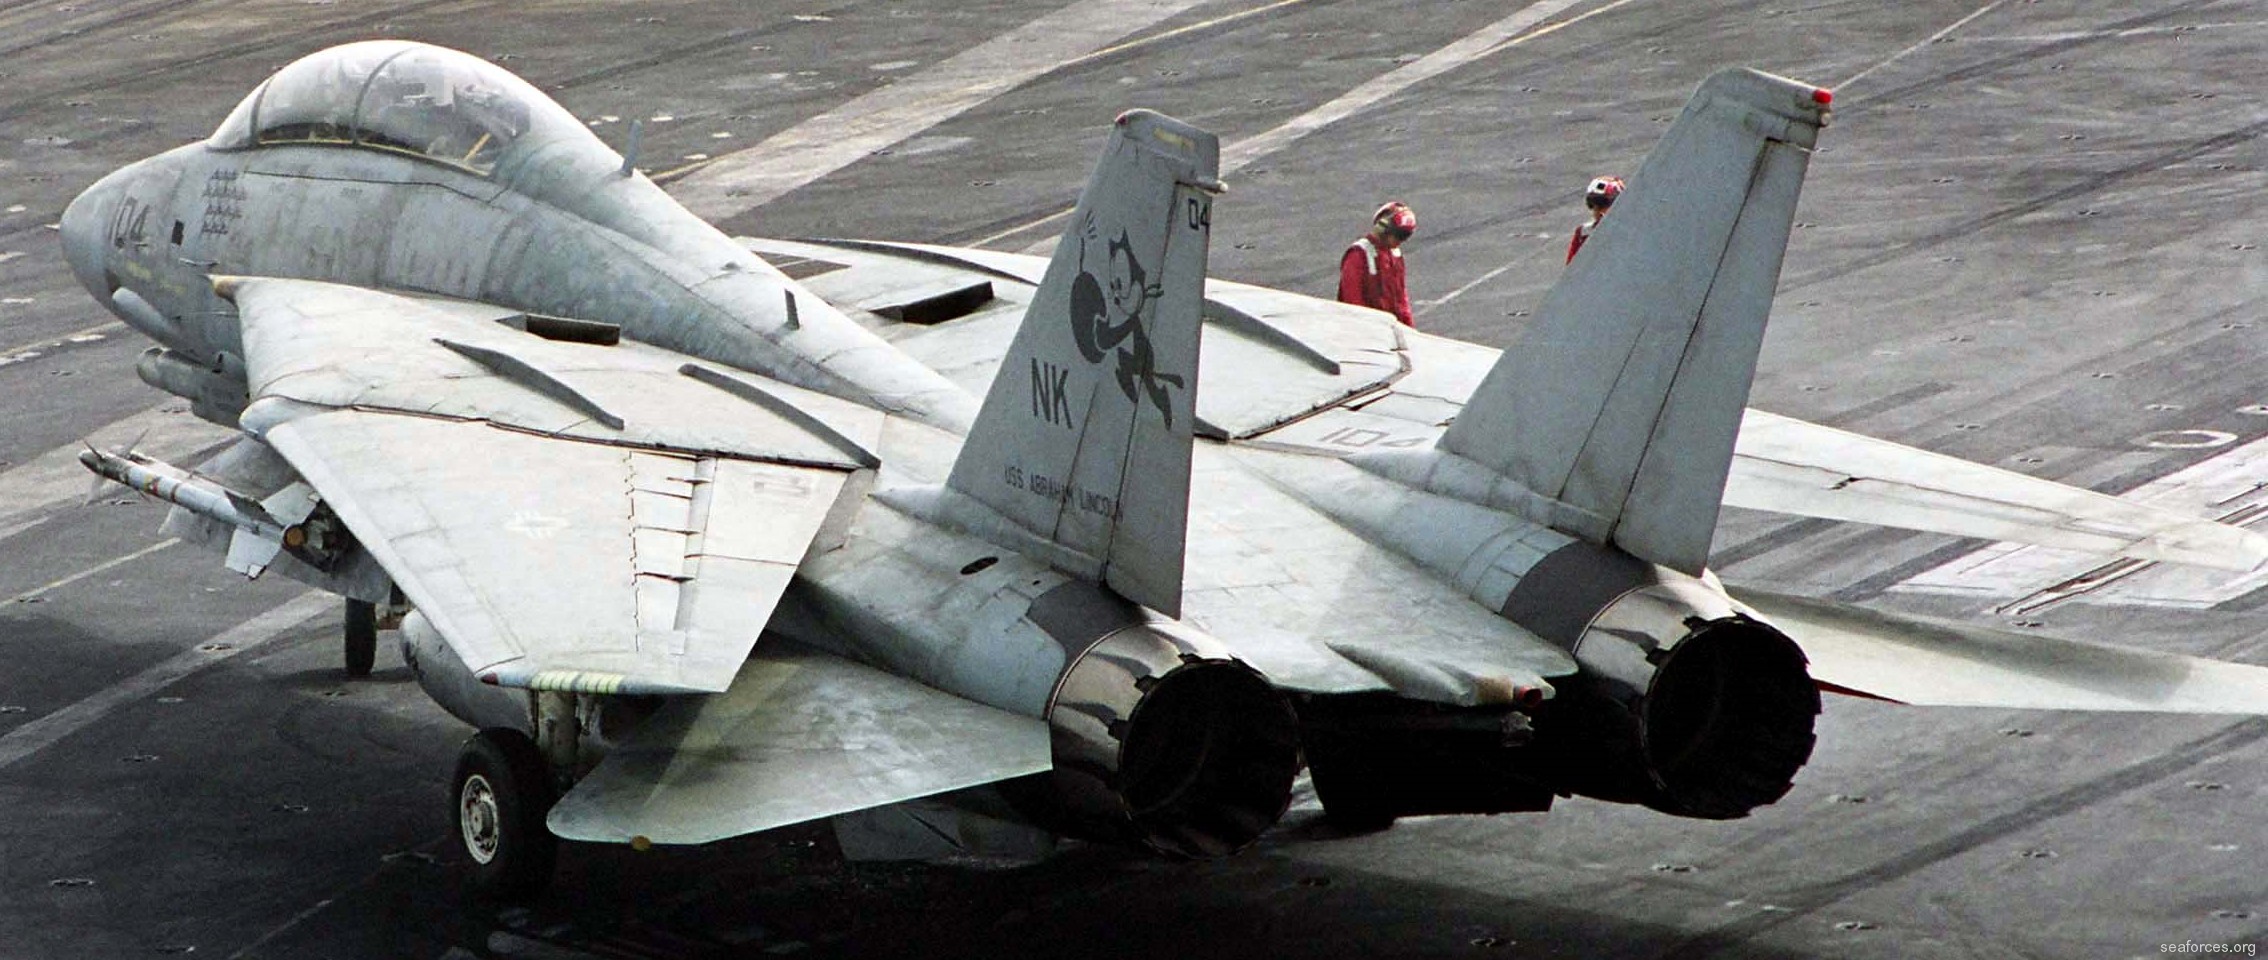 vf-31 tomcatters fighter squadron navy f-14d tomcat cvw-14 uss abraham lincoln cvn-72 96